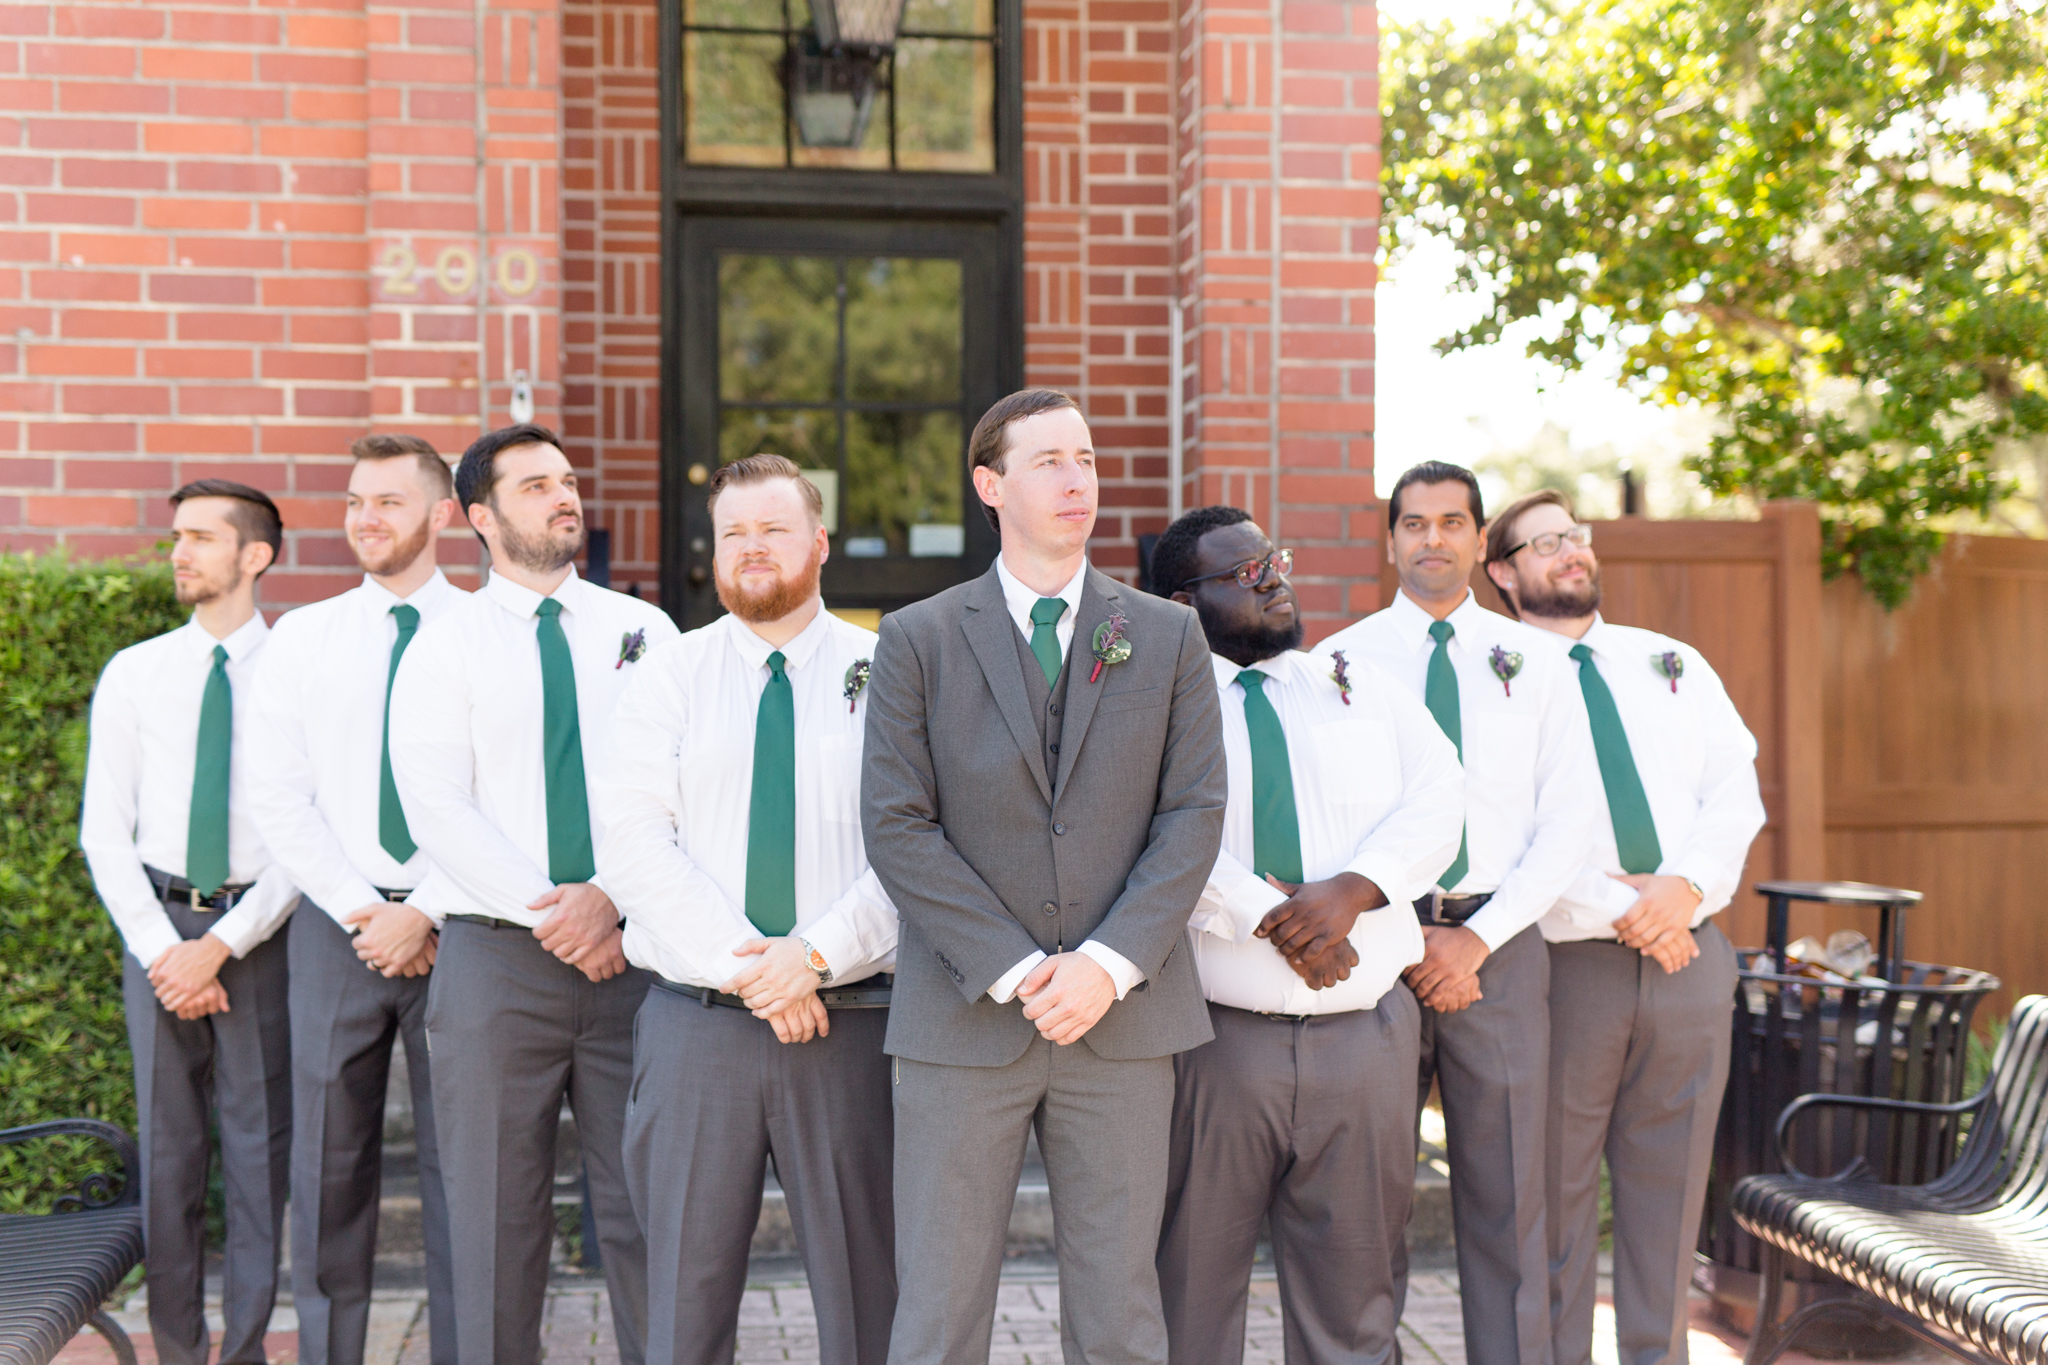 Groom and groomsmen stand together.